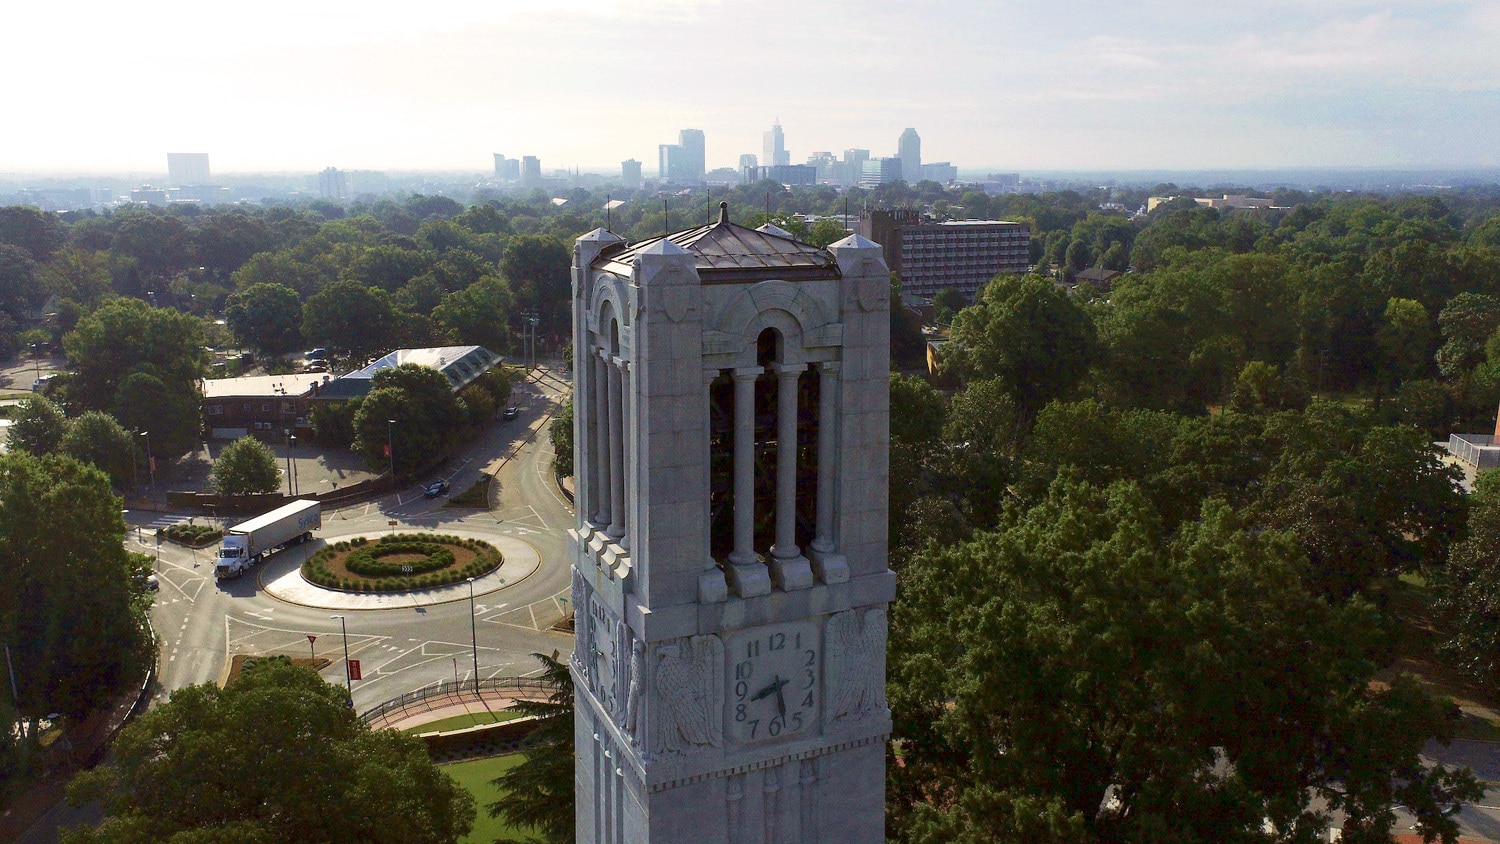 The Belltower stands tall and proud above Raleigh, with the downtown skyline close behind.